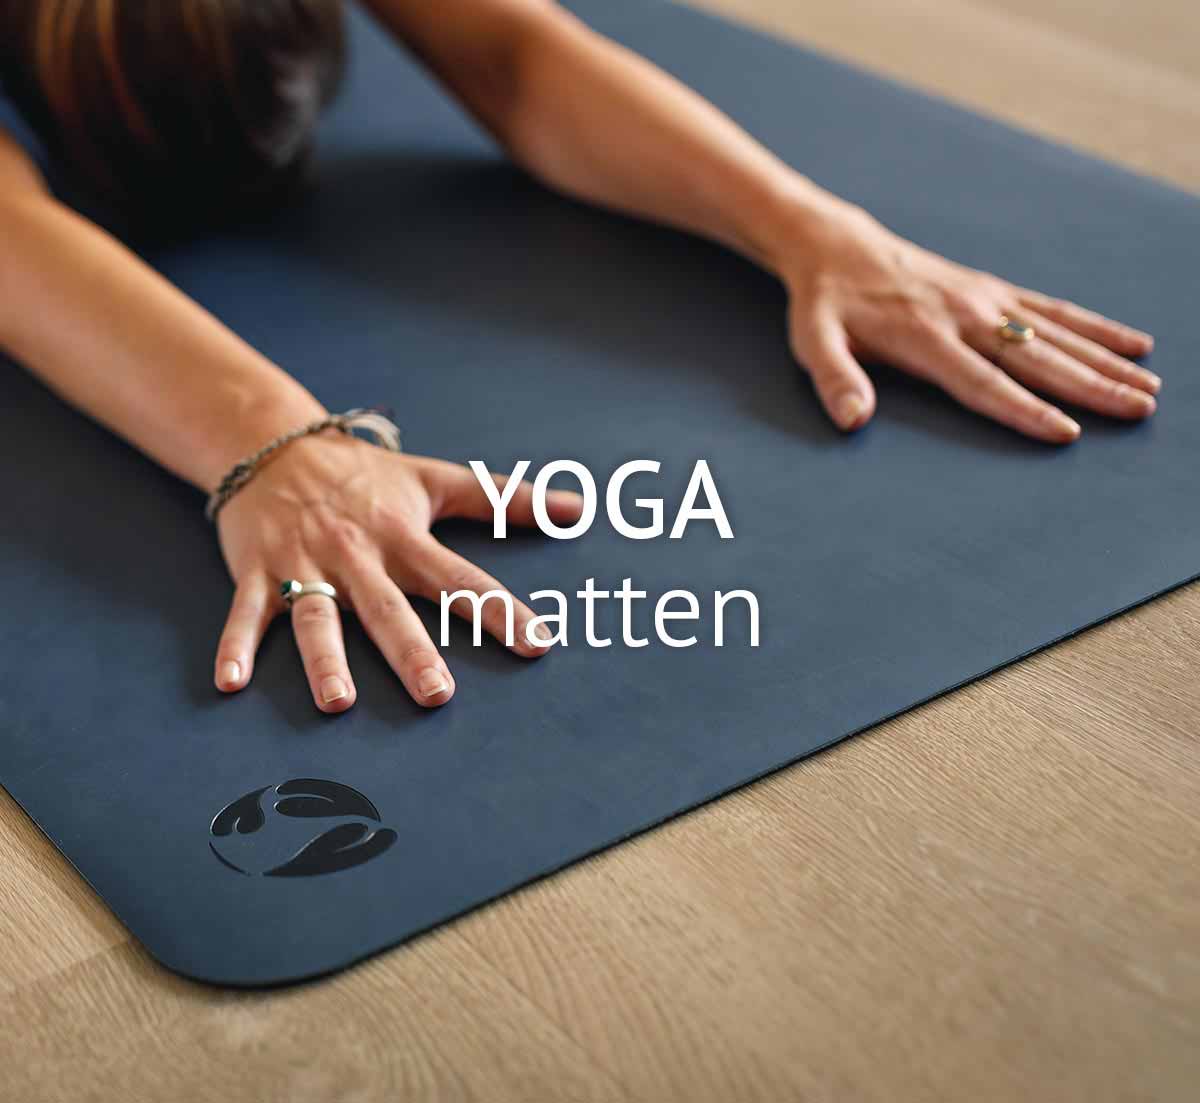 yoga and the mat